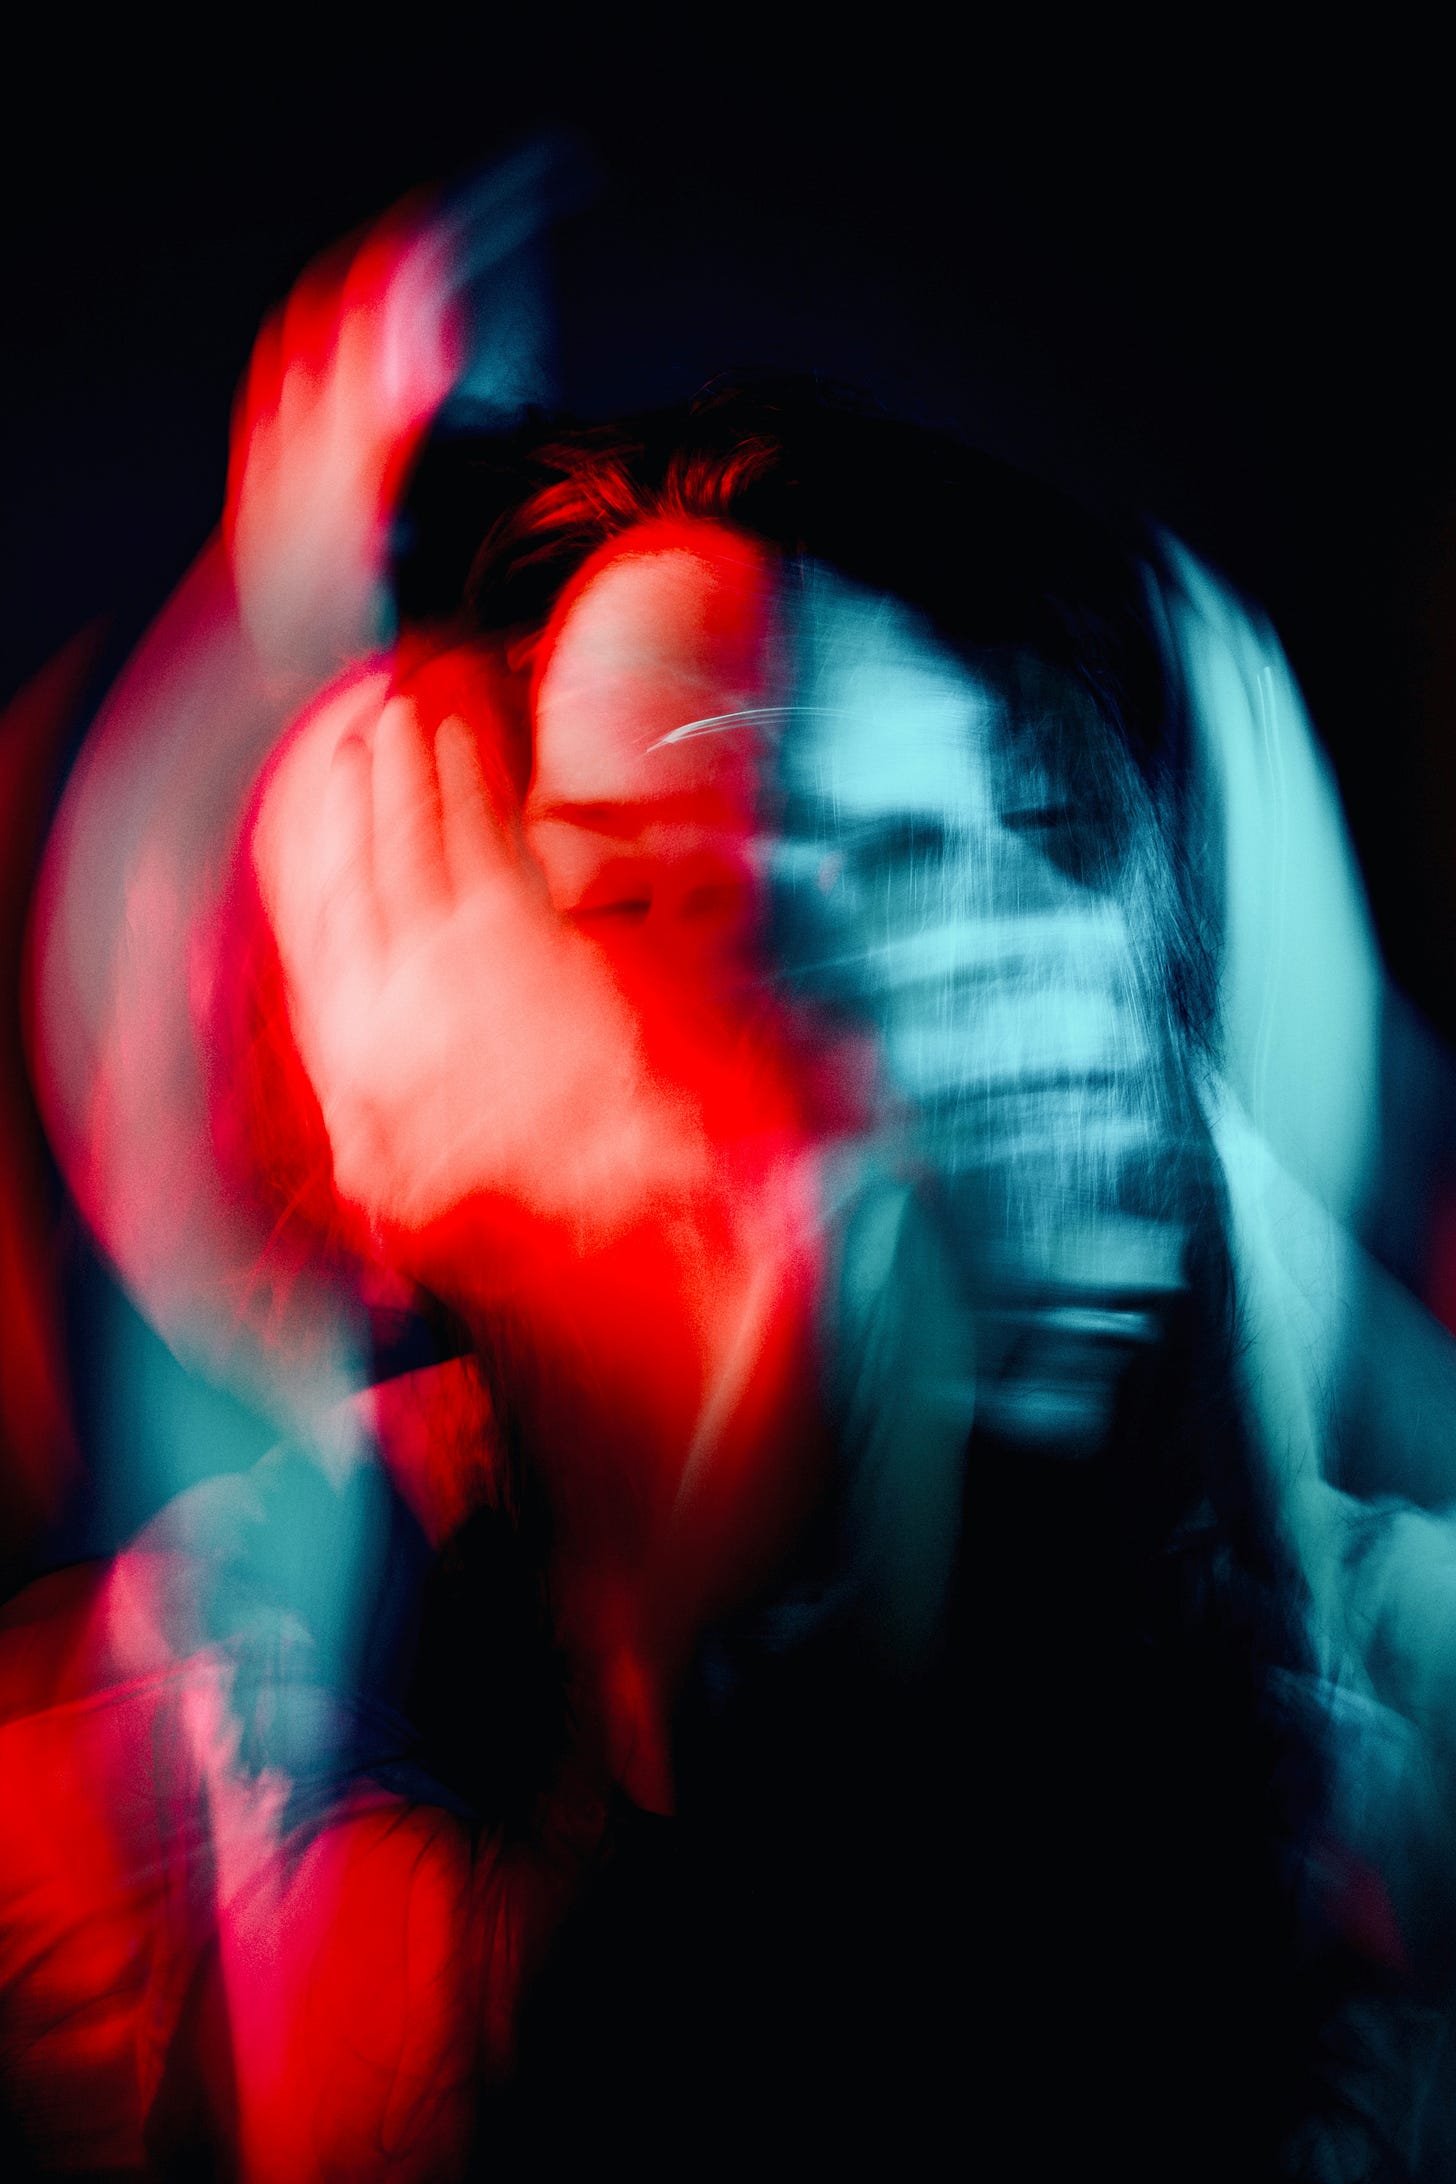 black, red, and blue blurred photo of a person